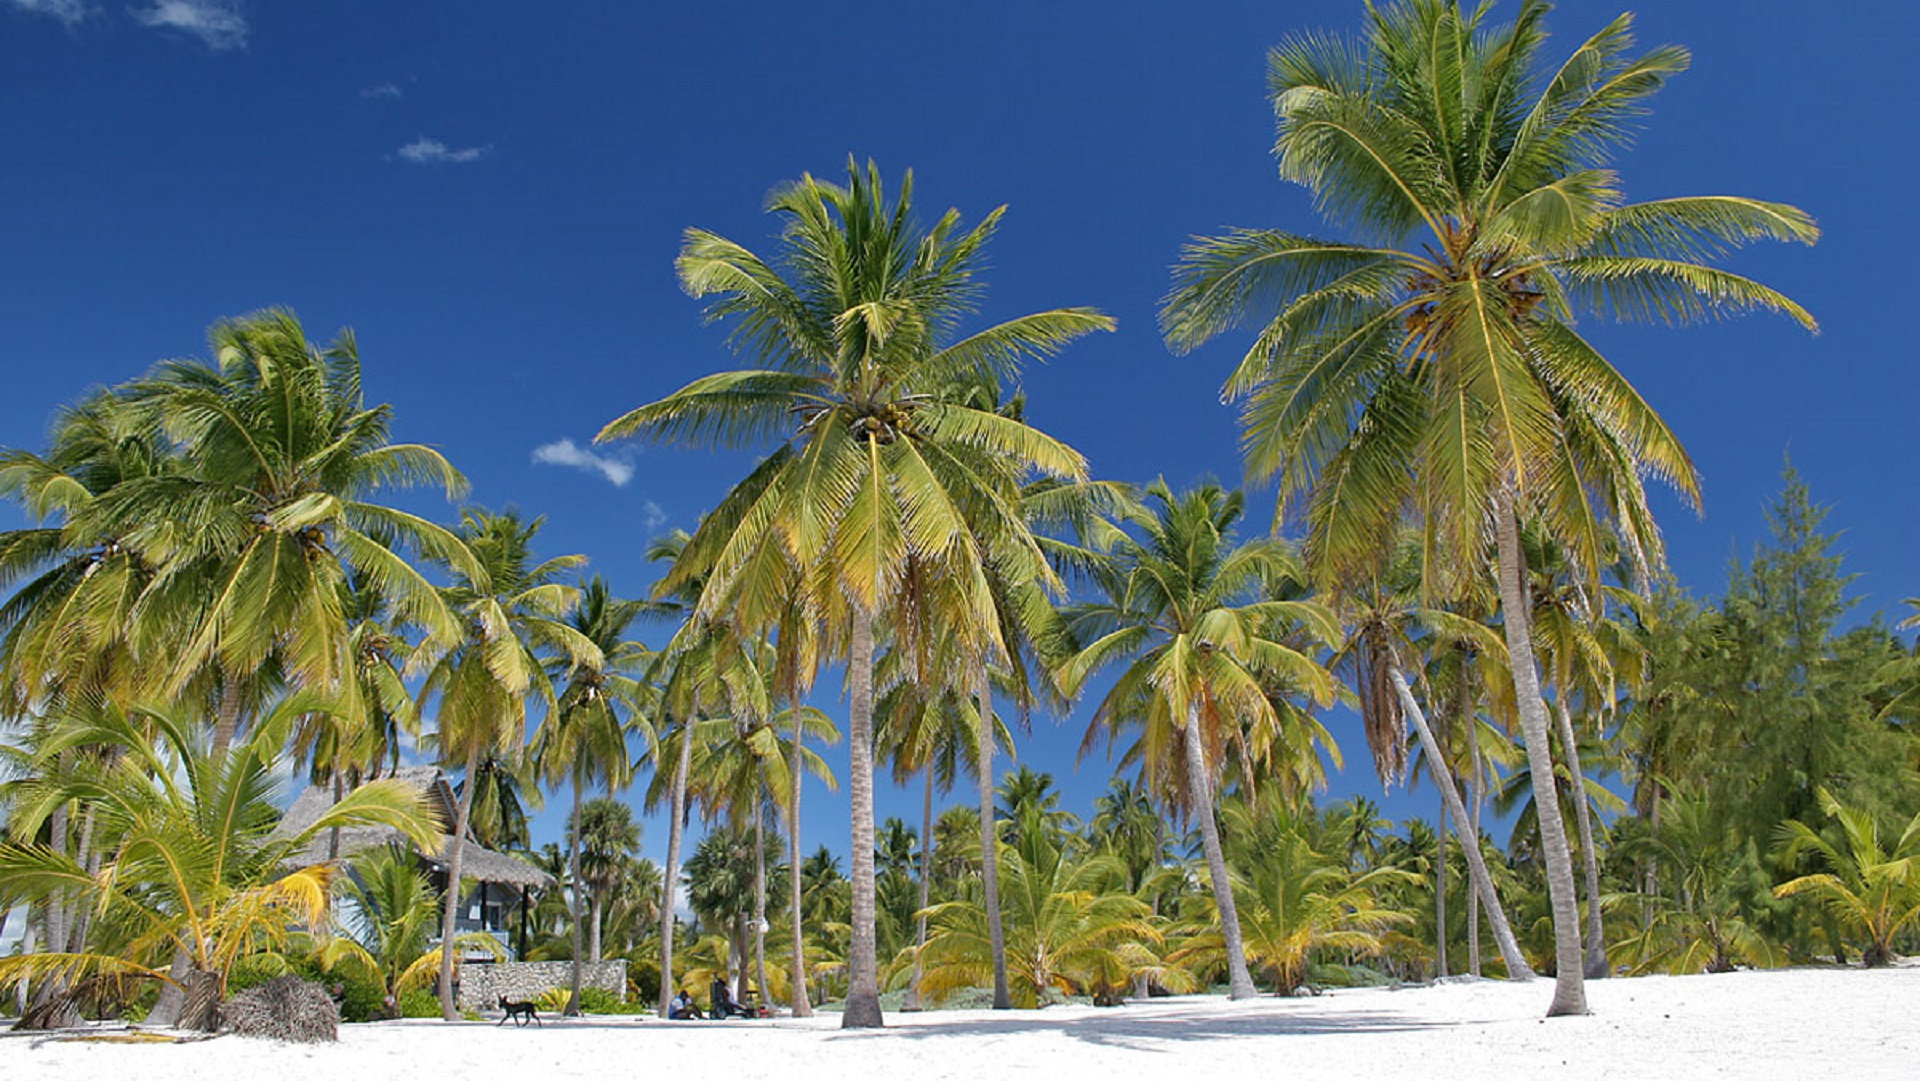 Travel to the Dominican Republic with Caribbean Tours